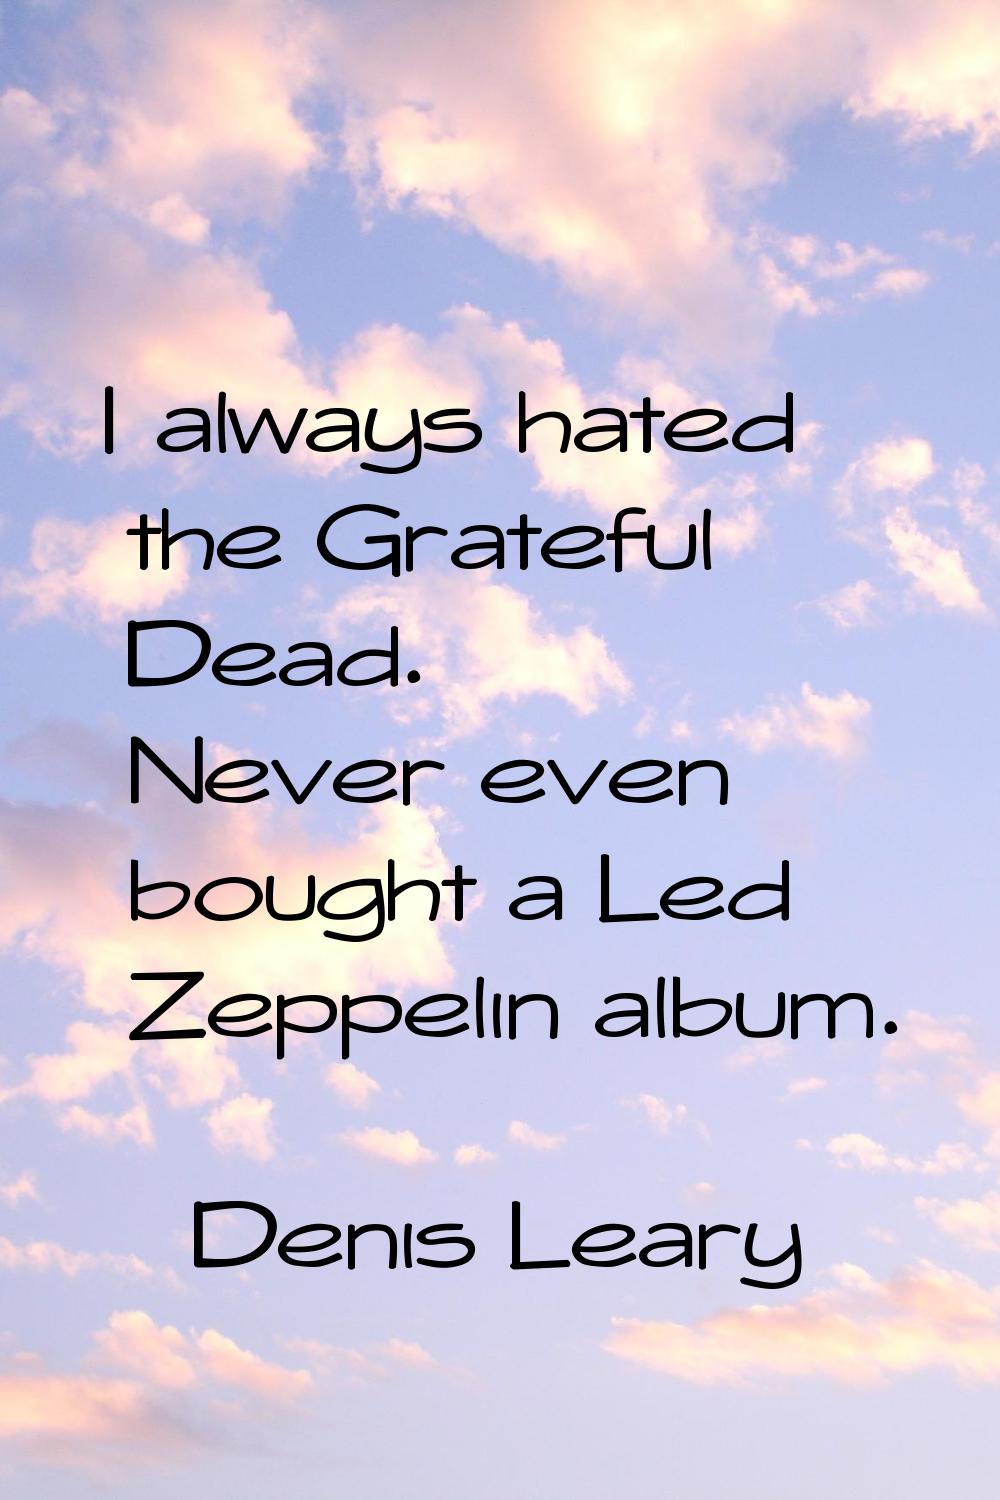 I always hated the Grateful Dead. Never even bought a Led Zeppelin album.